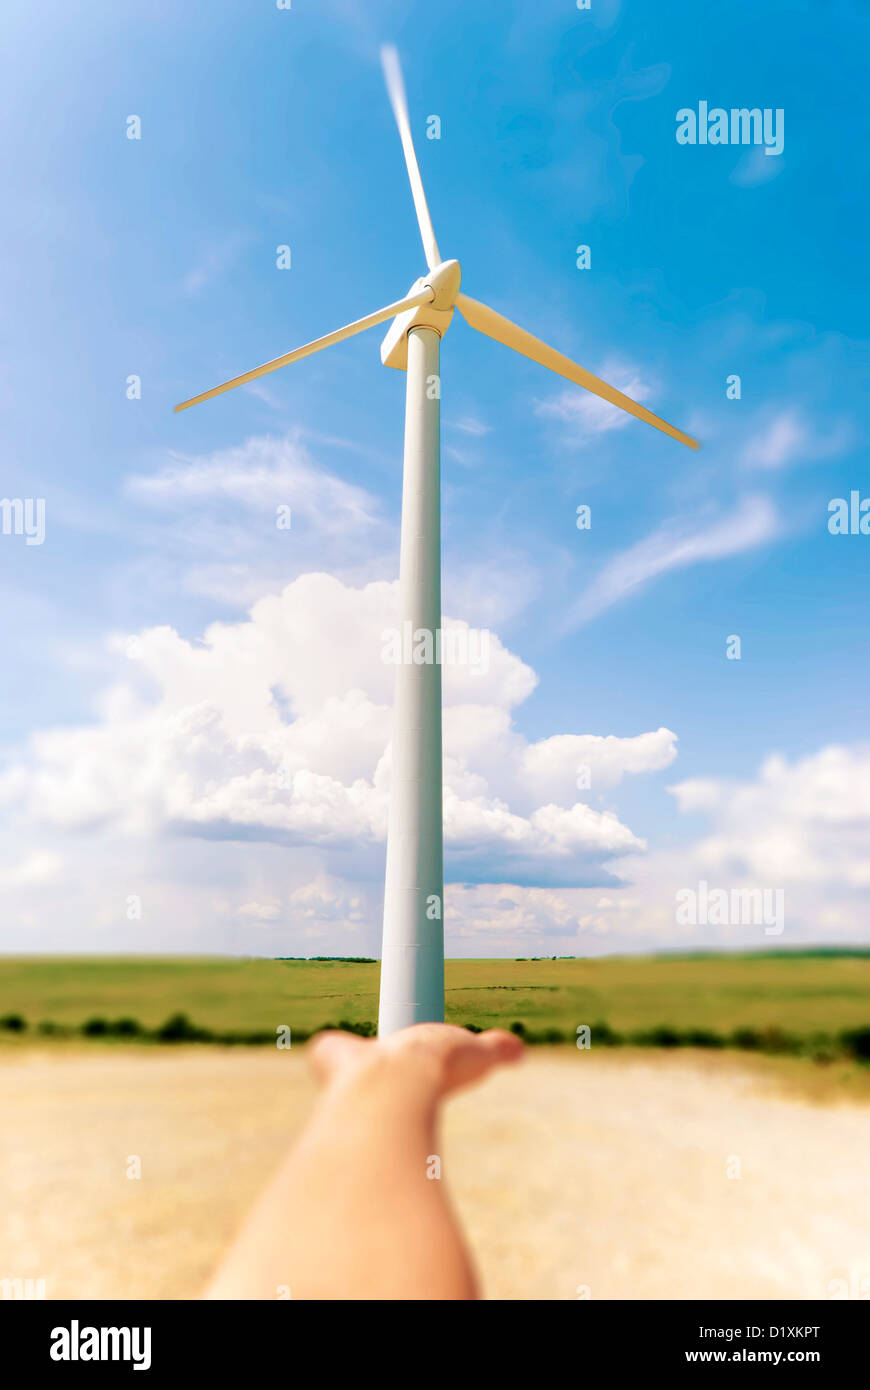 Stock Photo of hand holding a windmill. Background a blue sky with clouds Stock Photo